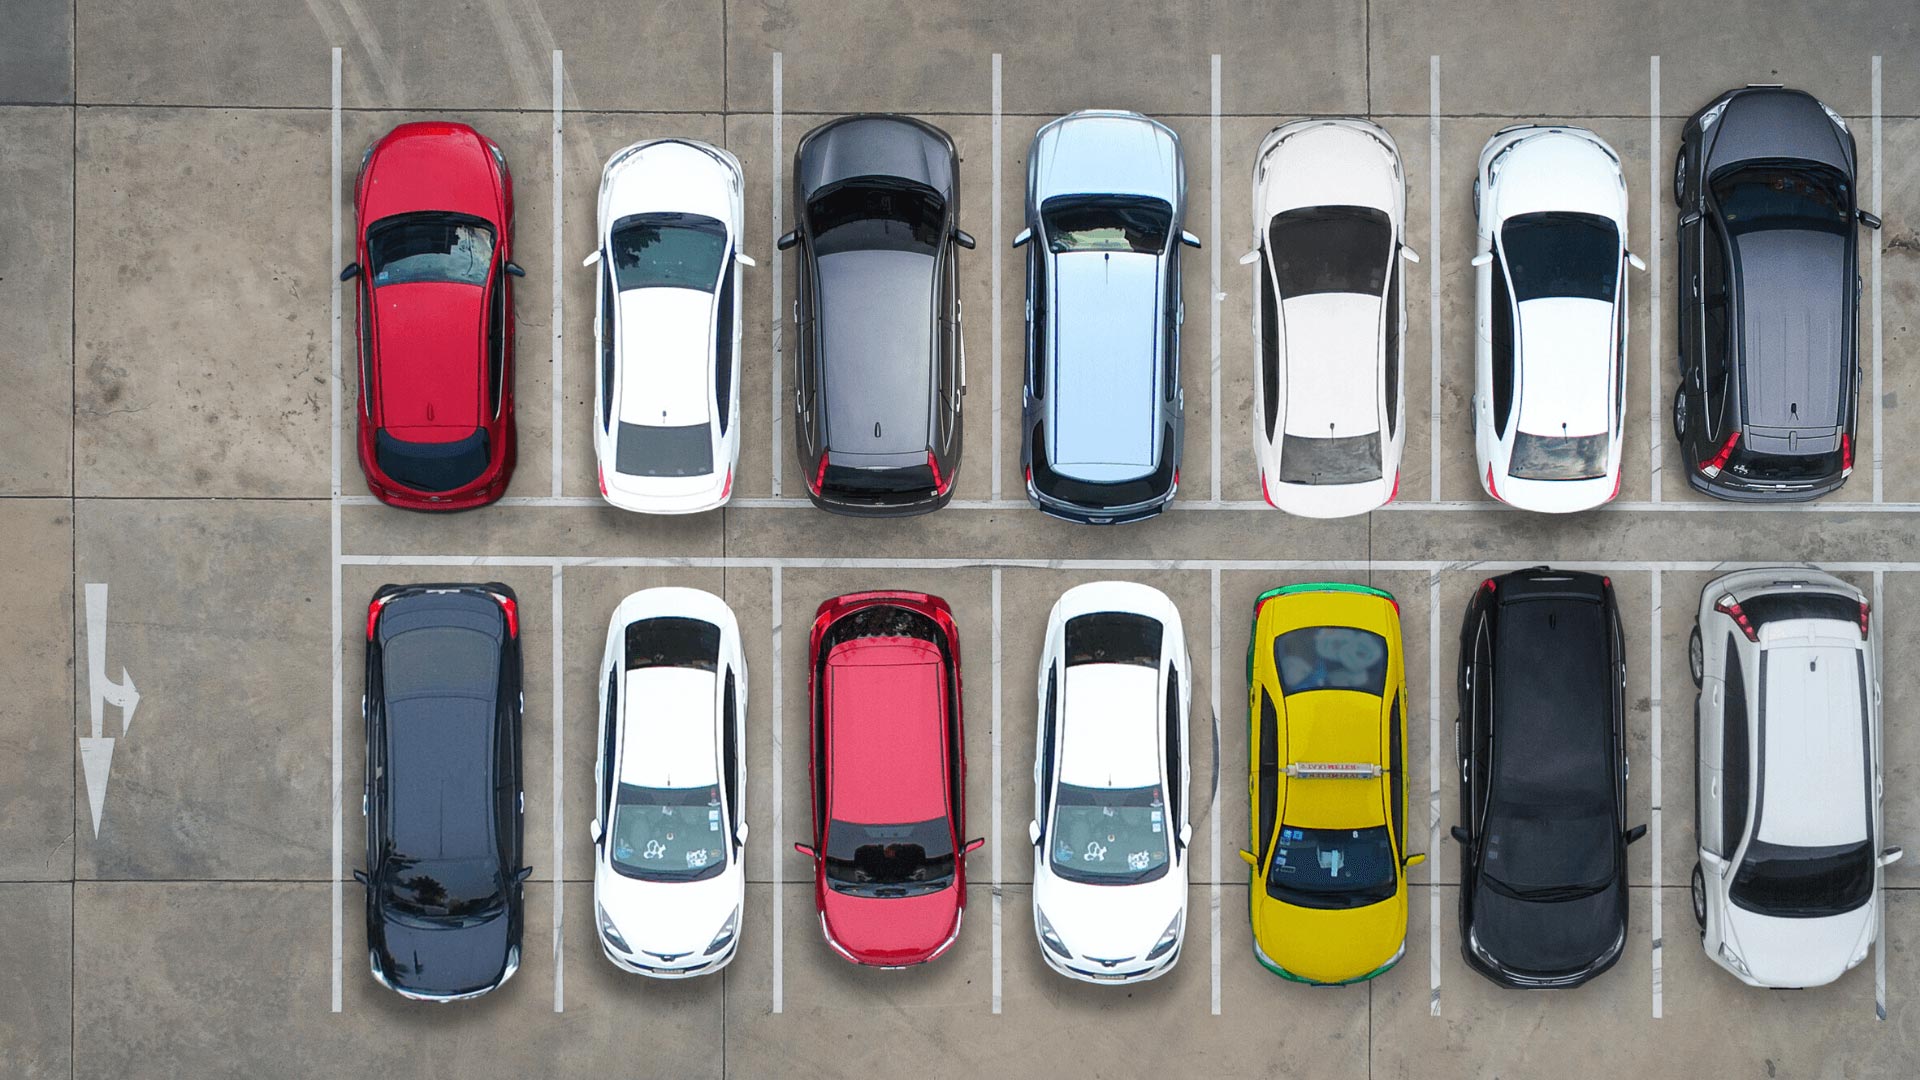 Corporate fleet of vehicles parked in a parking lot